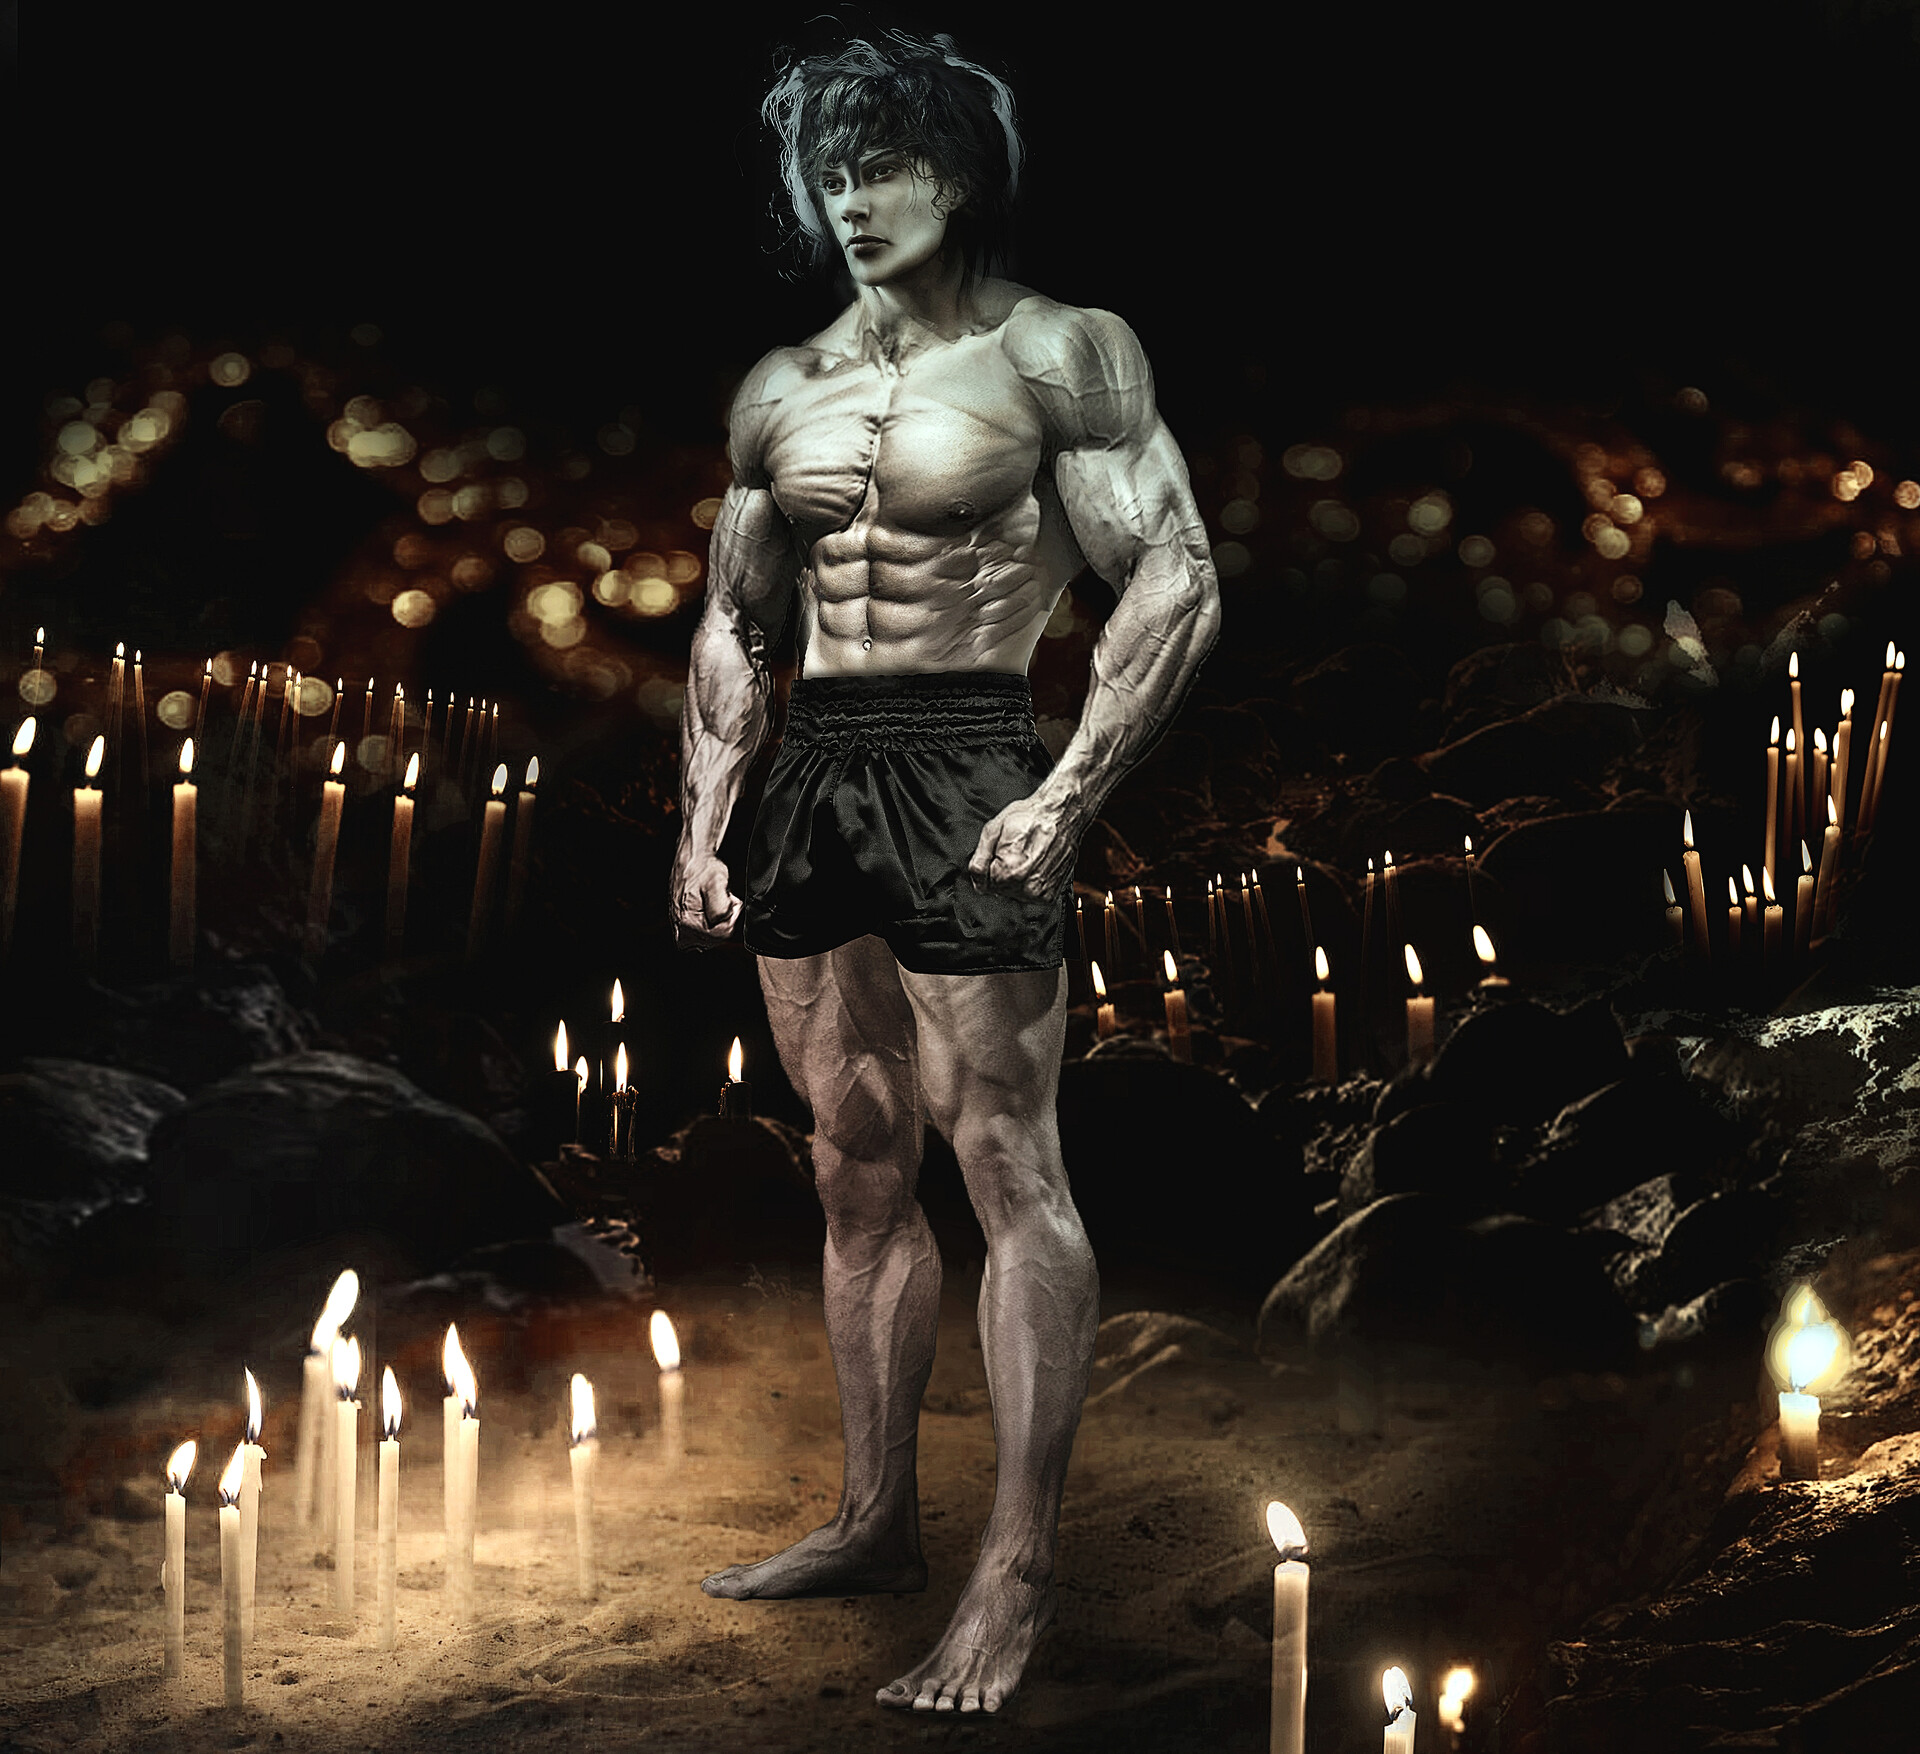 Ohma Tokita from Kengan Ashura - This is the place were he go when need the